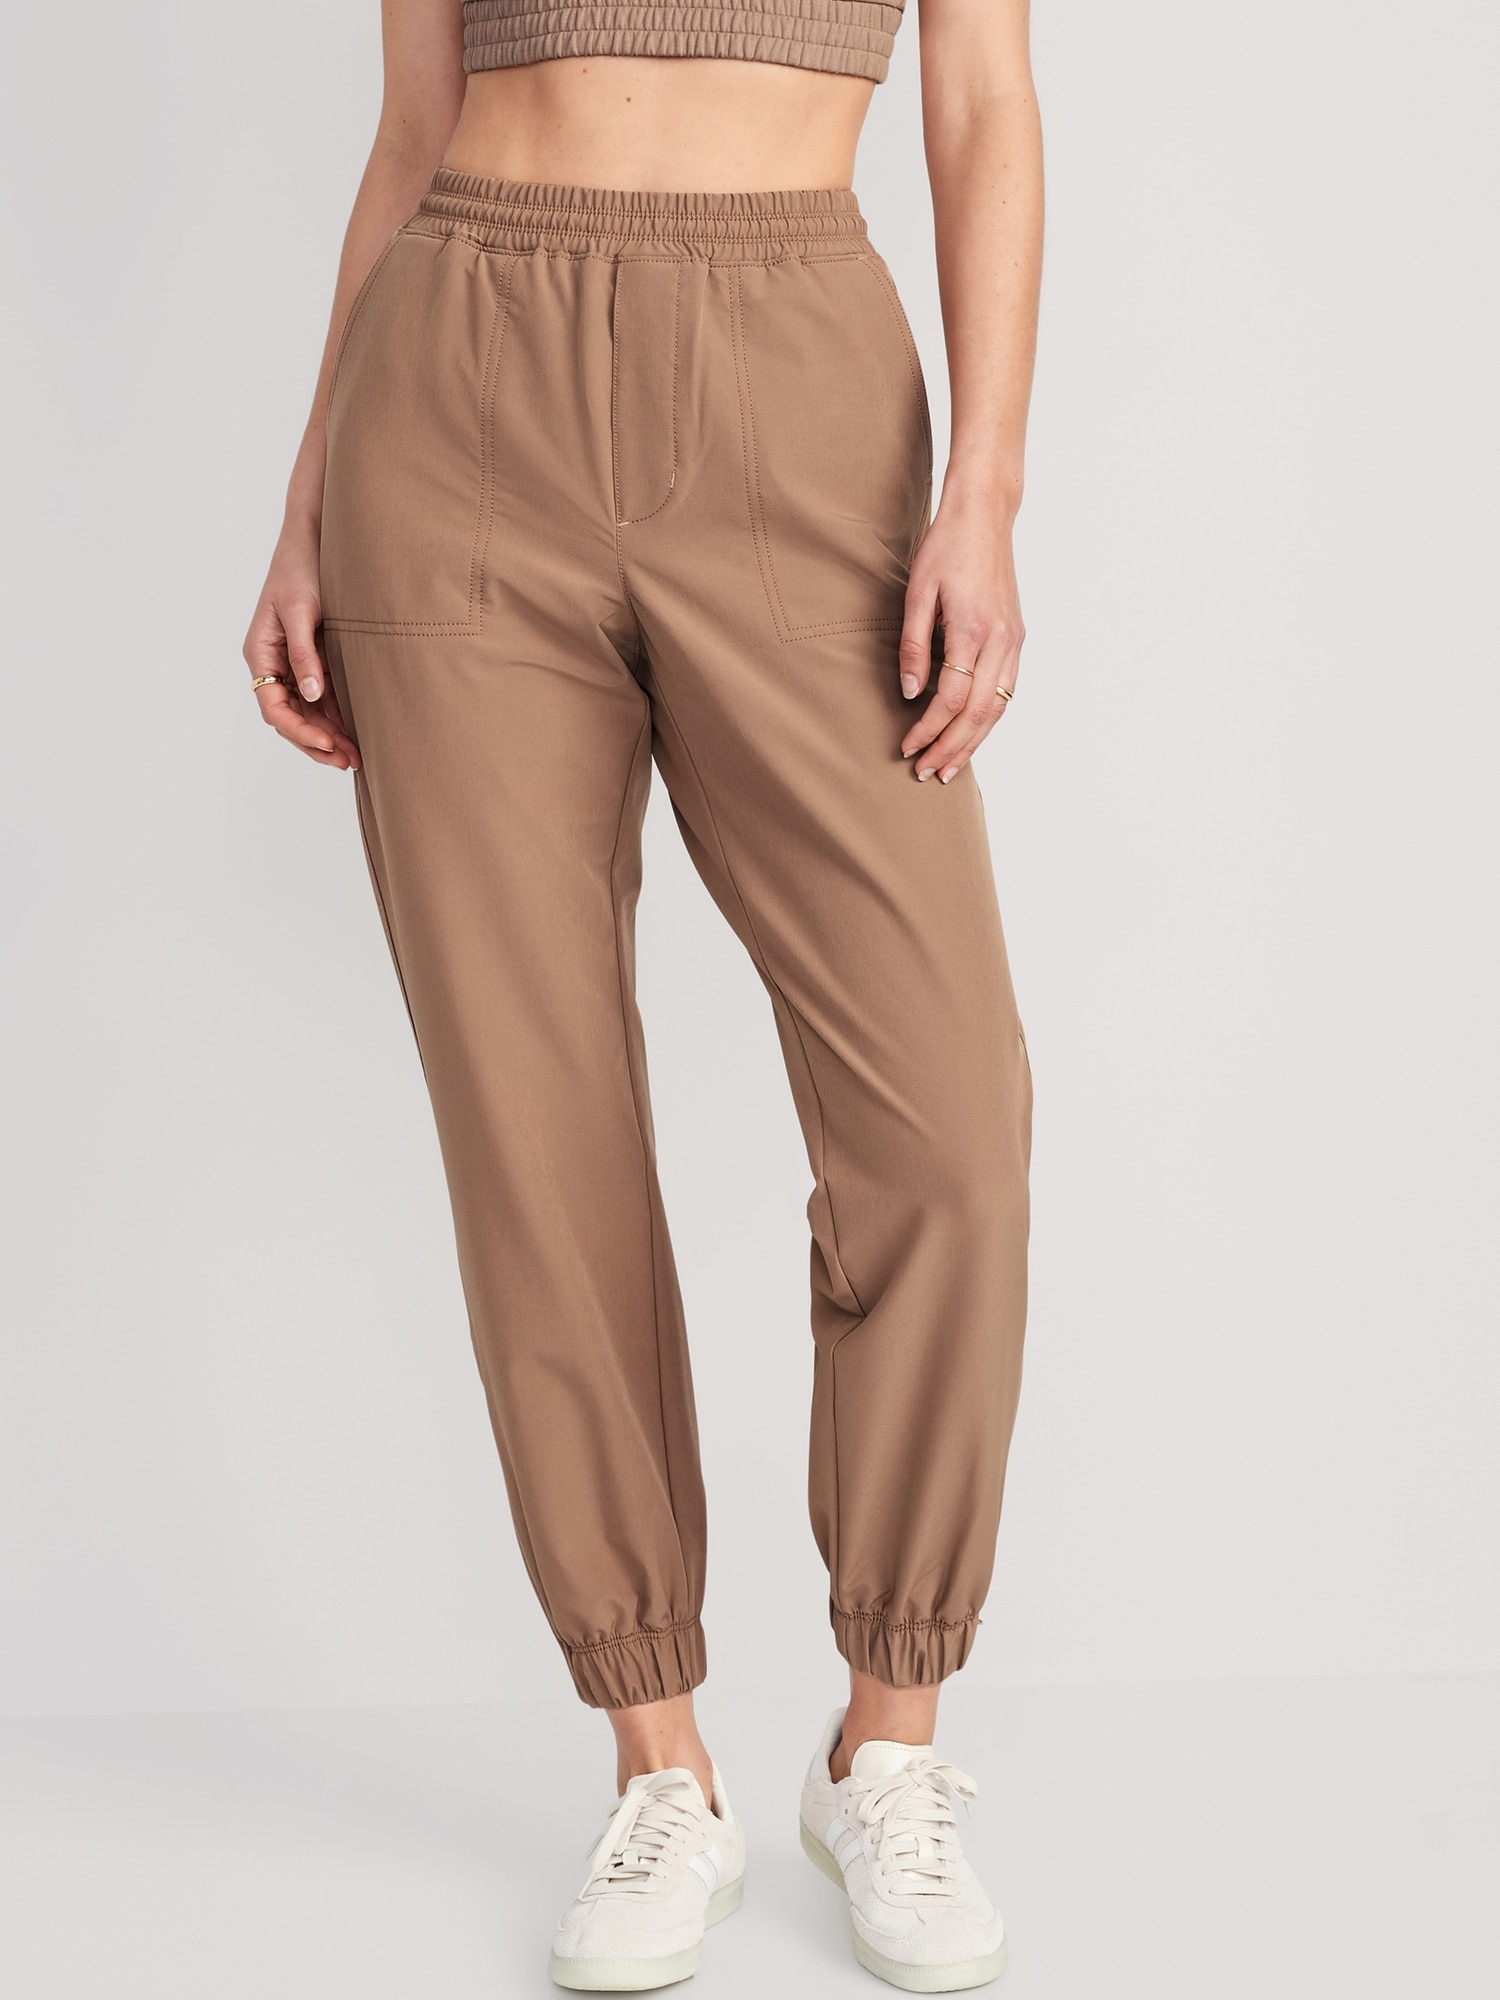 High-Waisted All-Seasons StretchTech Water-Repellent Jogger Pants